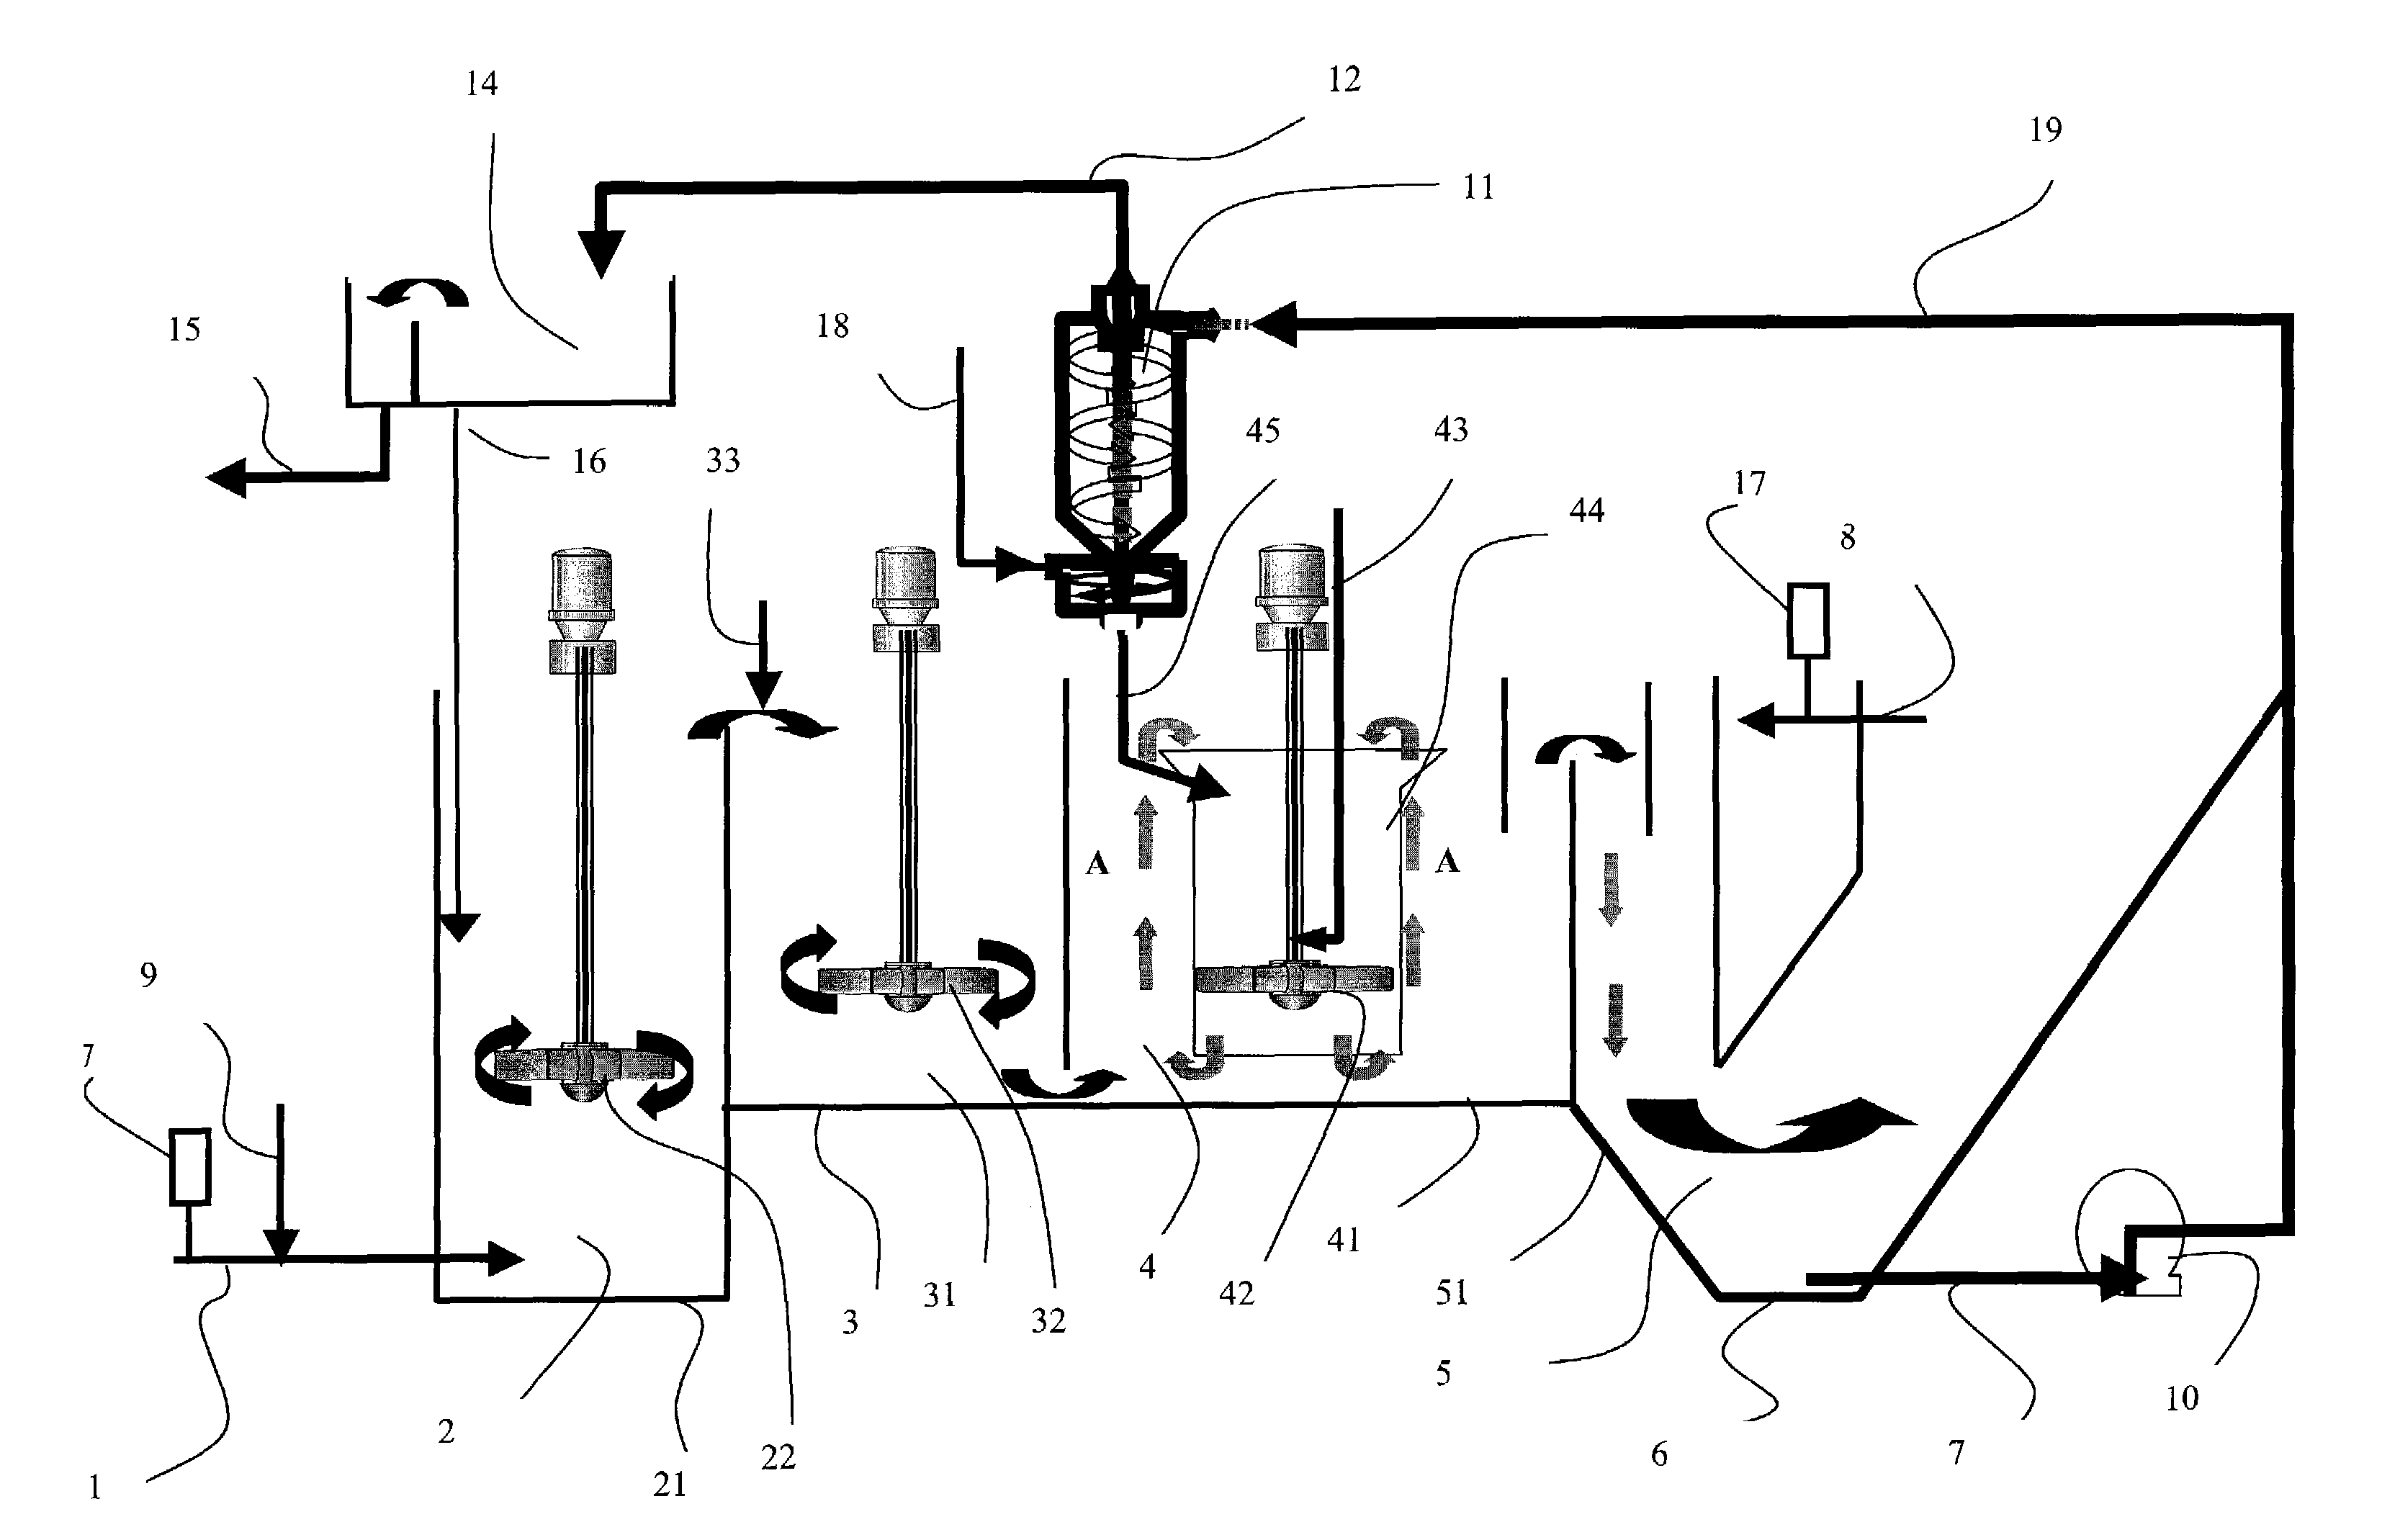 Water treatment method by ballasted flocculation, settling, and prior adsorbent contact